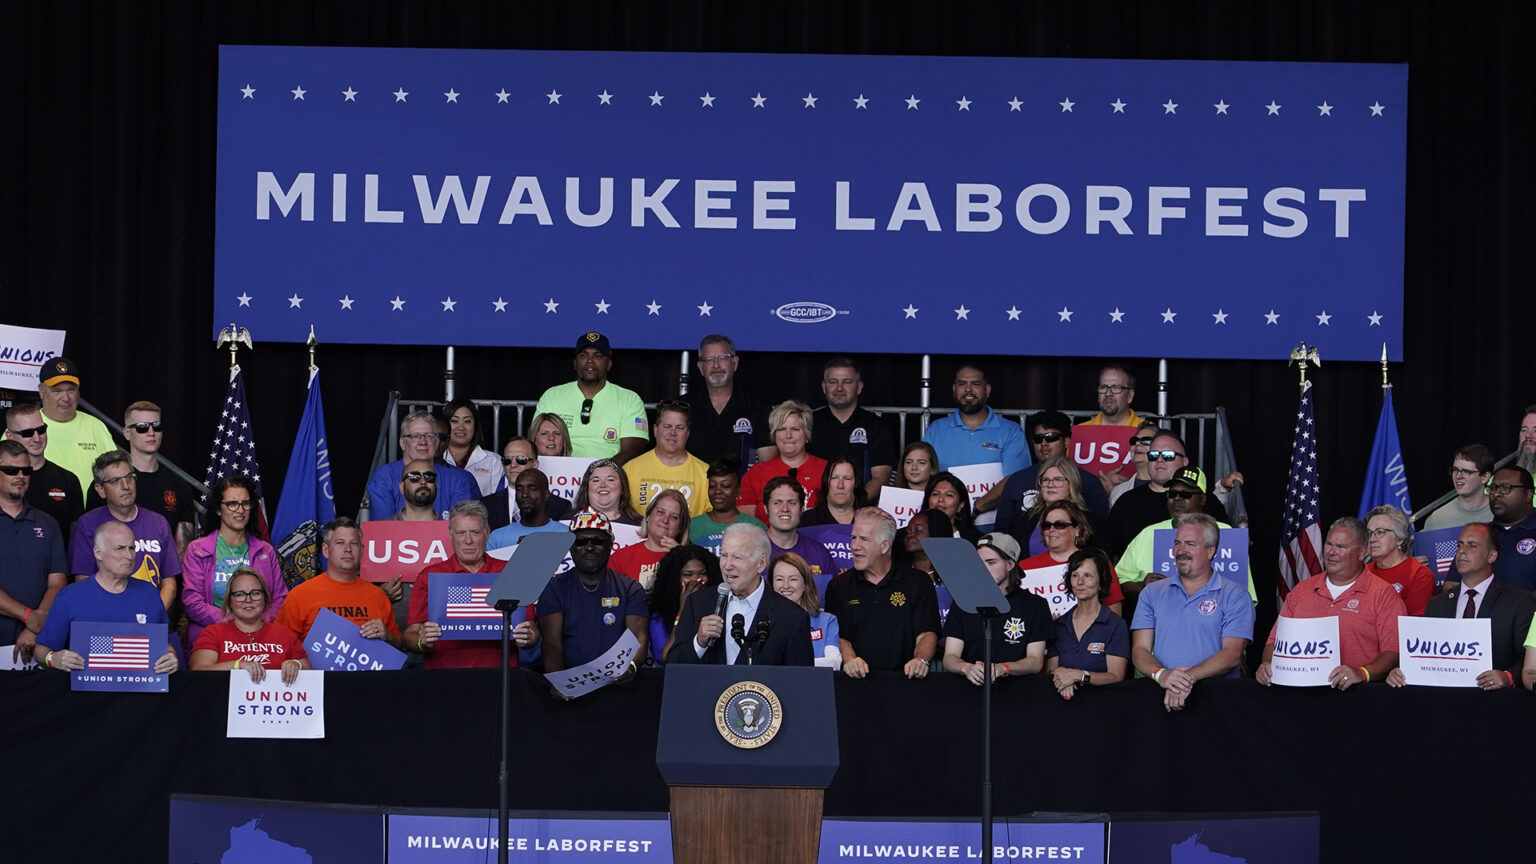 Joe Biden speaks behind a podium with the seal of the President of the United States of America and in front of an audience holding signs that read Union Strong, Unions. and USA with U.S. and Wisconsin flags and a banner reading Milwaukee Laborfest in the background.